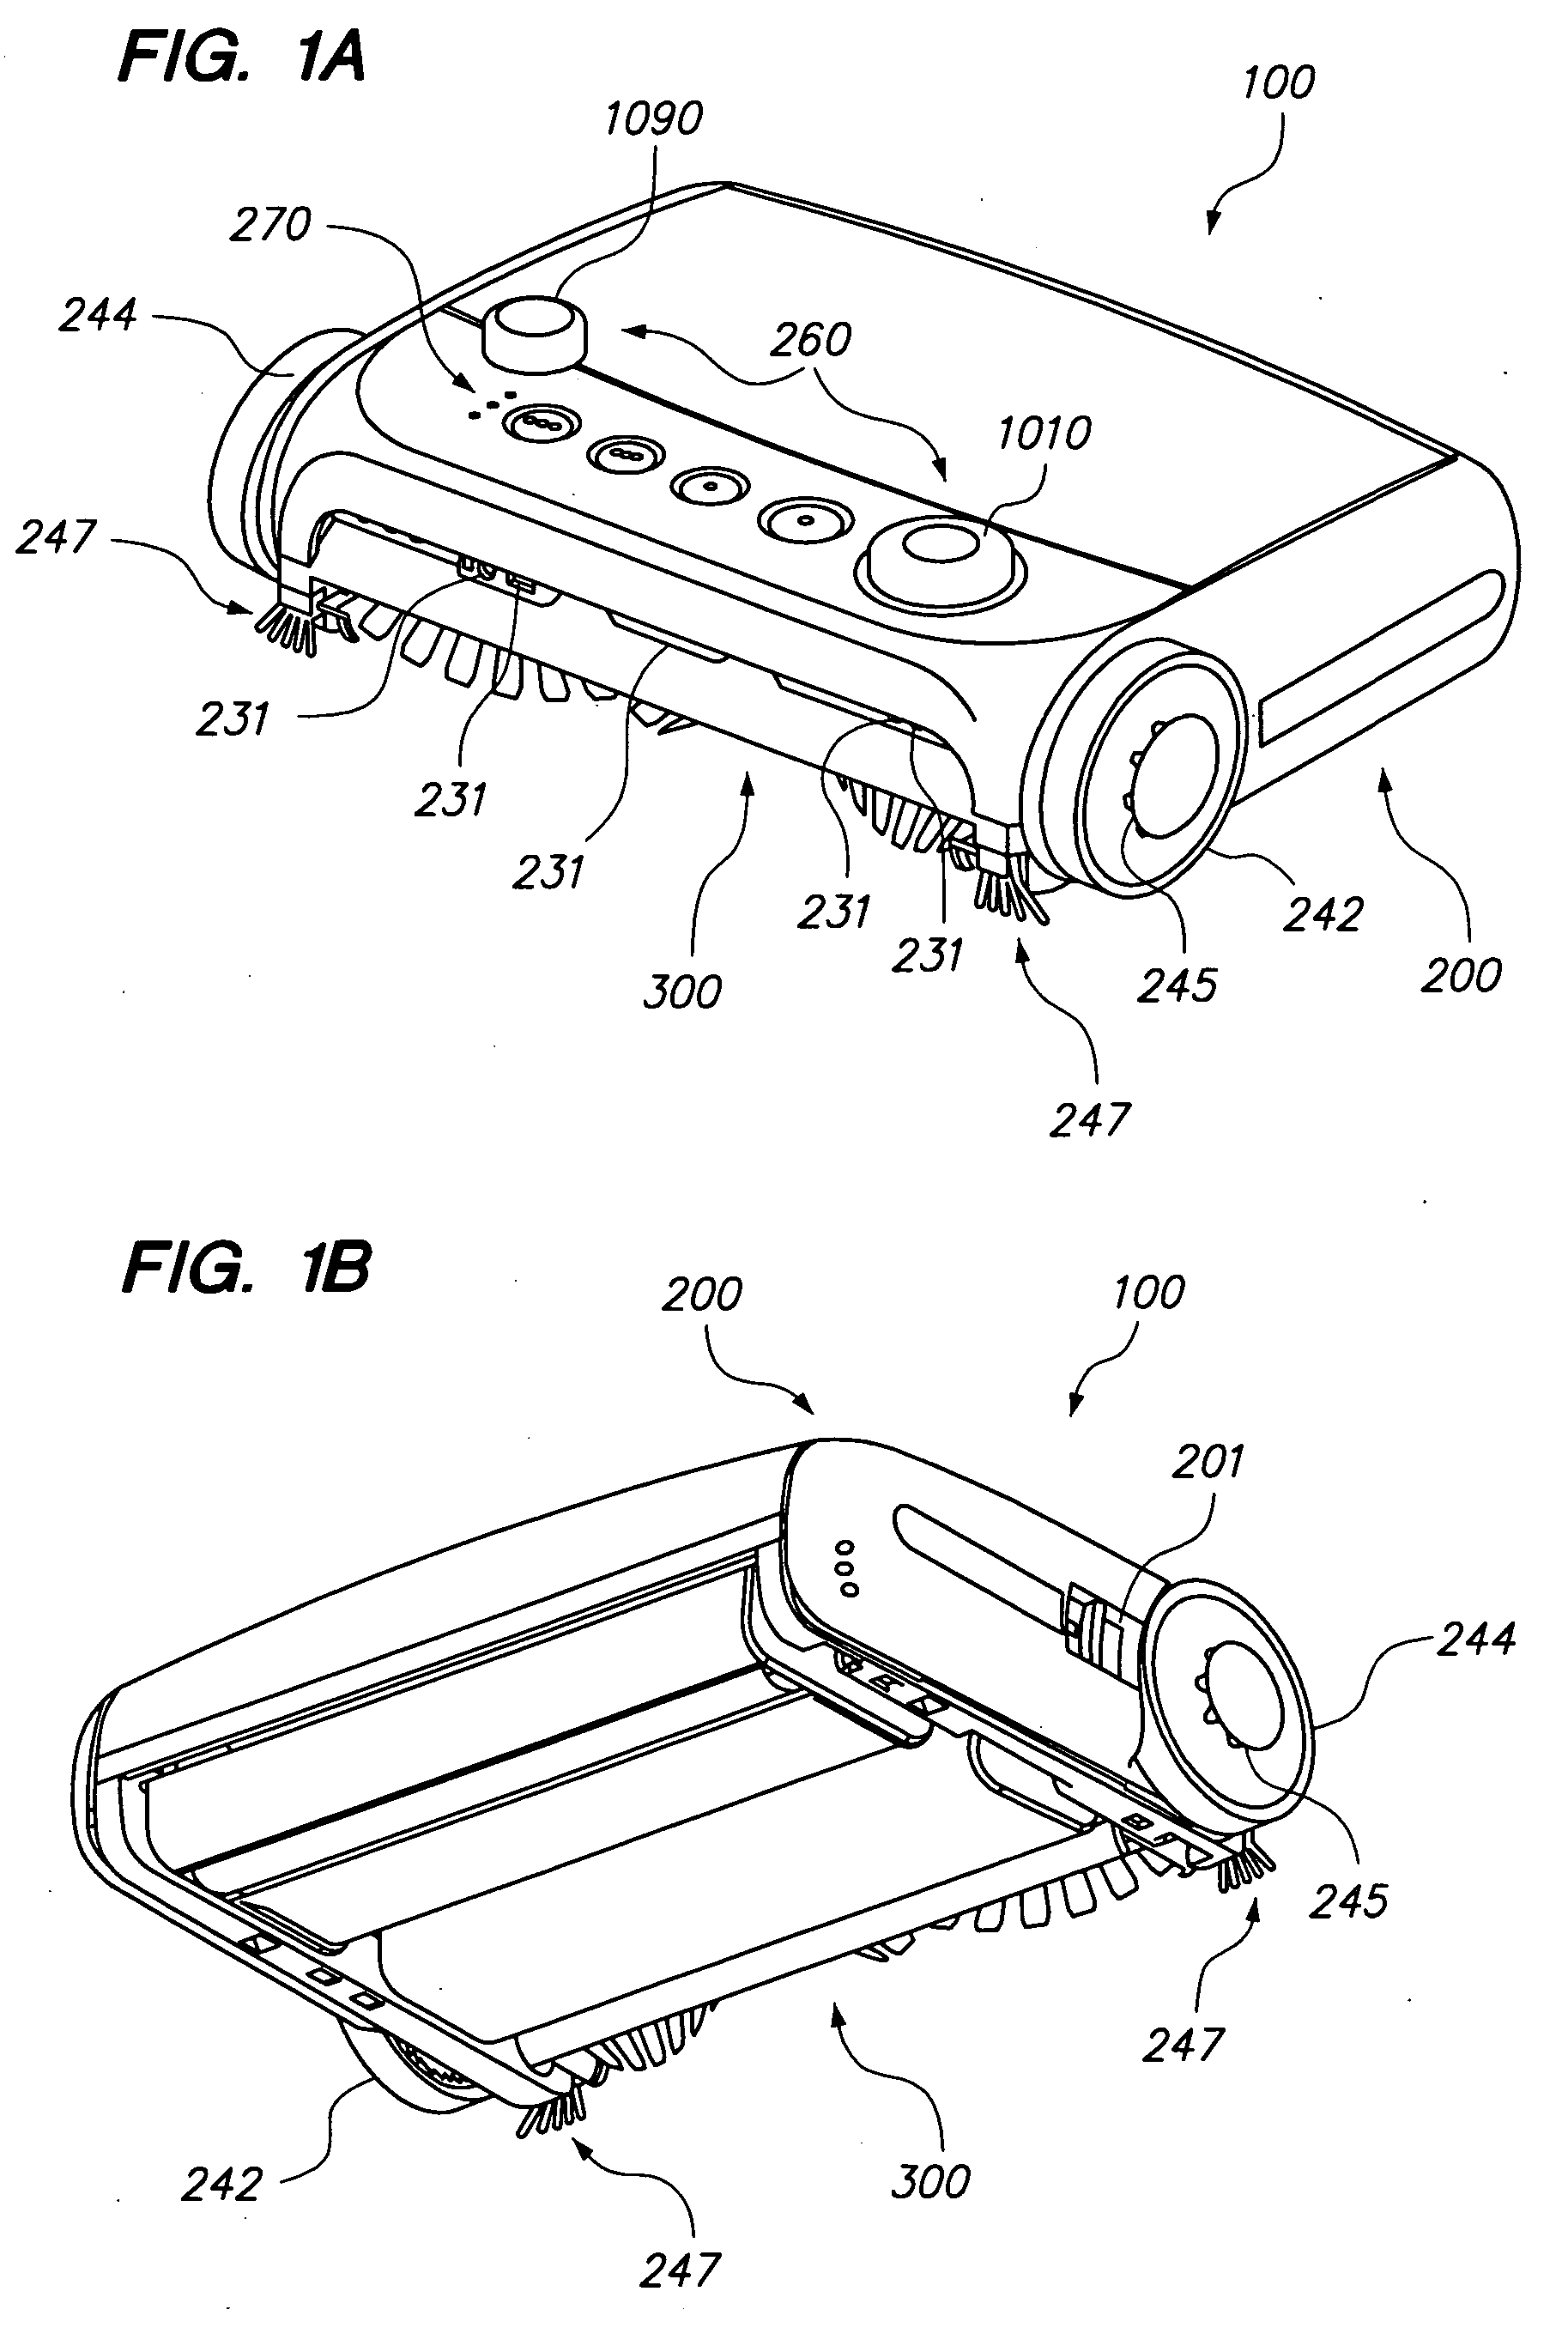 Localization and mapping system and method for a robotic device